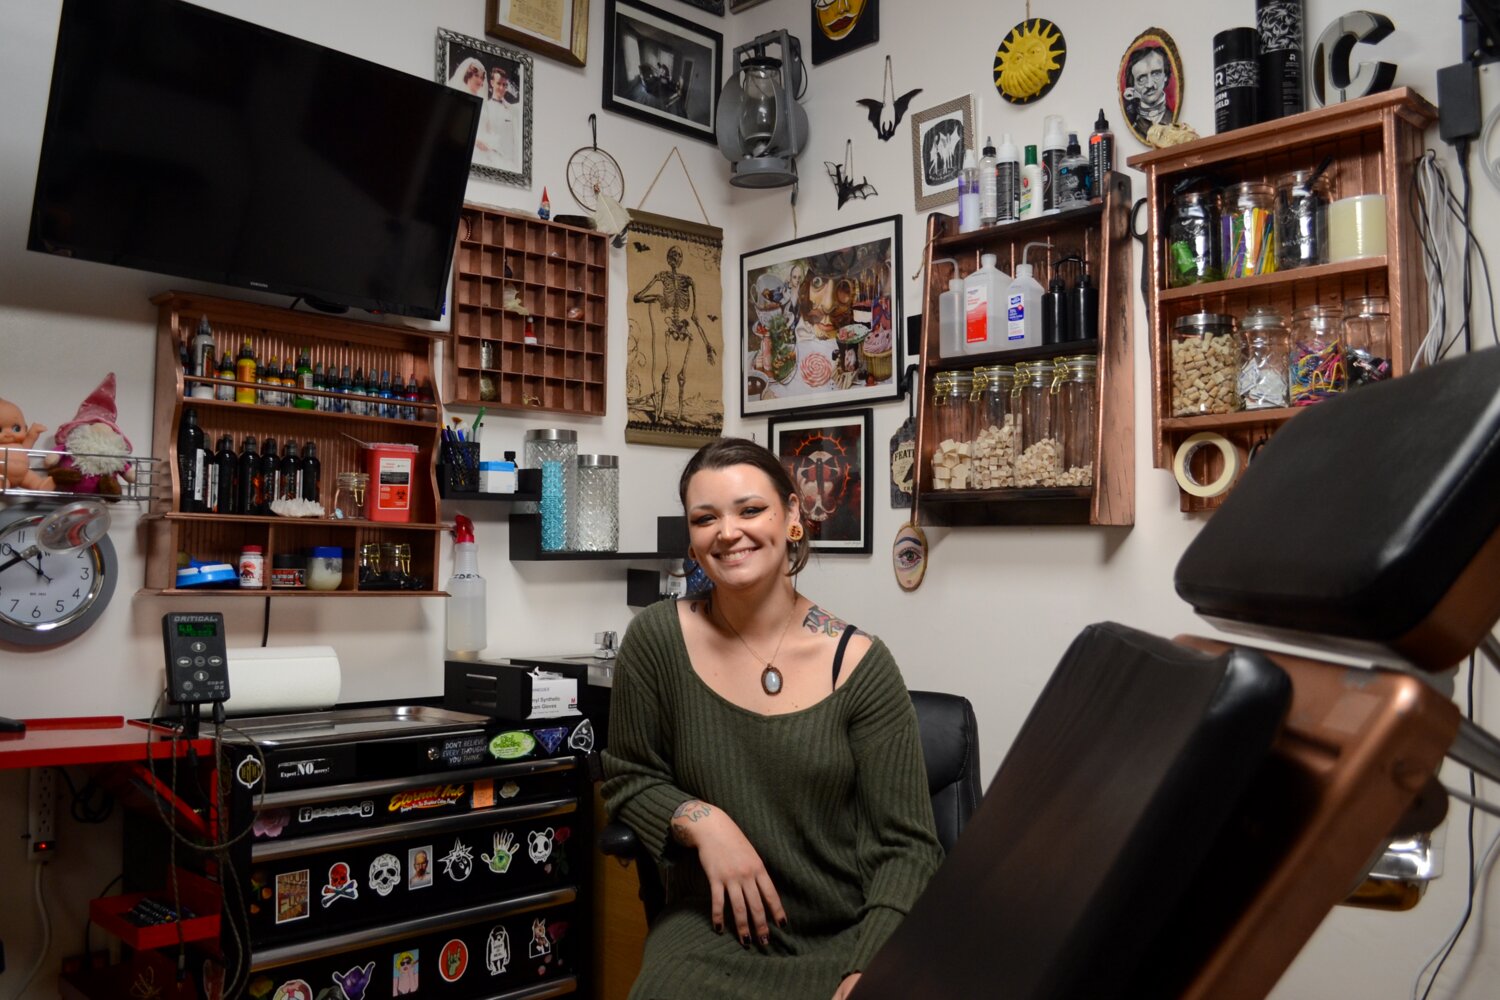 Chrystal Santos sits in her office at Eclectic Body Art, located at 446 Main St. in Warren. At one point she was the youngest licensed tattoo artist in the state, and is now running her own shop at just 26 years old.